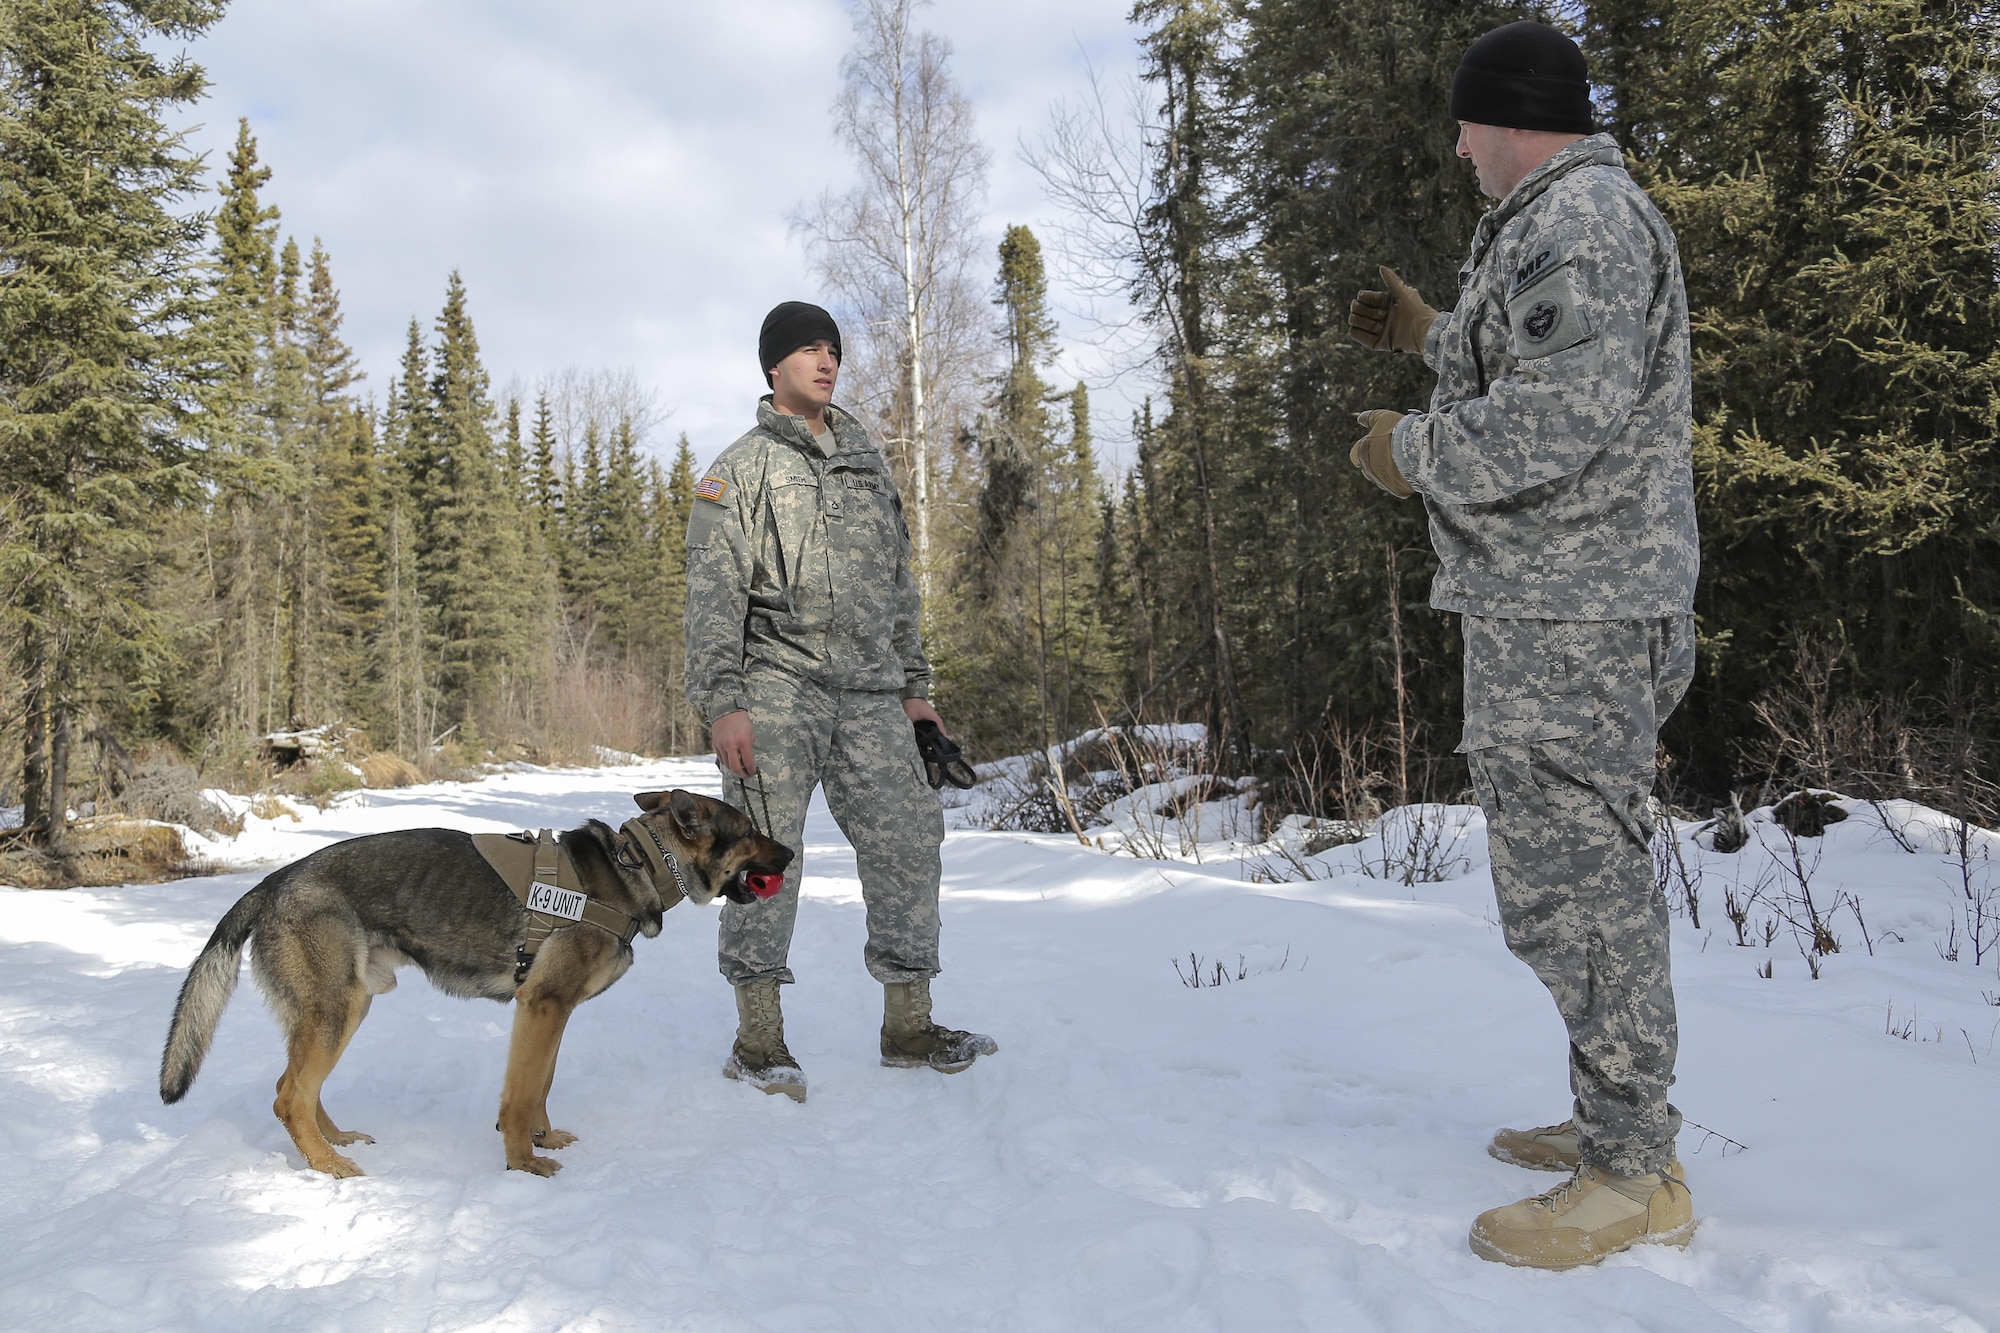 Army Staff Sgt. Daniel Turner, right, debriefs Army Pfc. Ian Smith after successfully detecting hidden simulated explosive devices during K-9 training at Joint Base Elmendorf-Richardson, Alaska, March 17, 2016. Turner is his detachment’s kennel master and Smith is a dog handler assigned to the 549th Military Working Dog Detachment. Air Force photo by Alejandro Pena